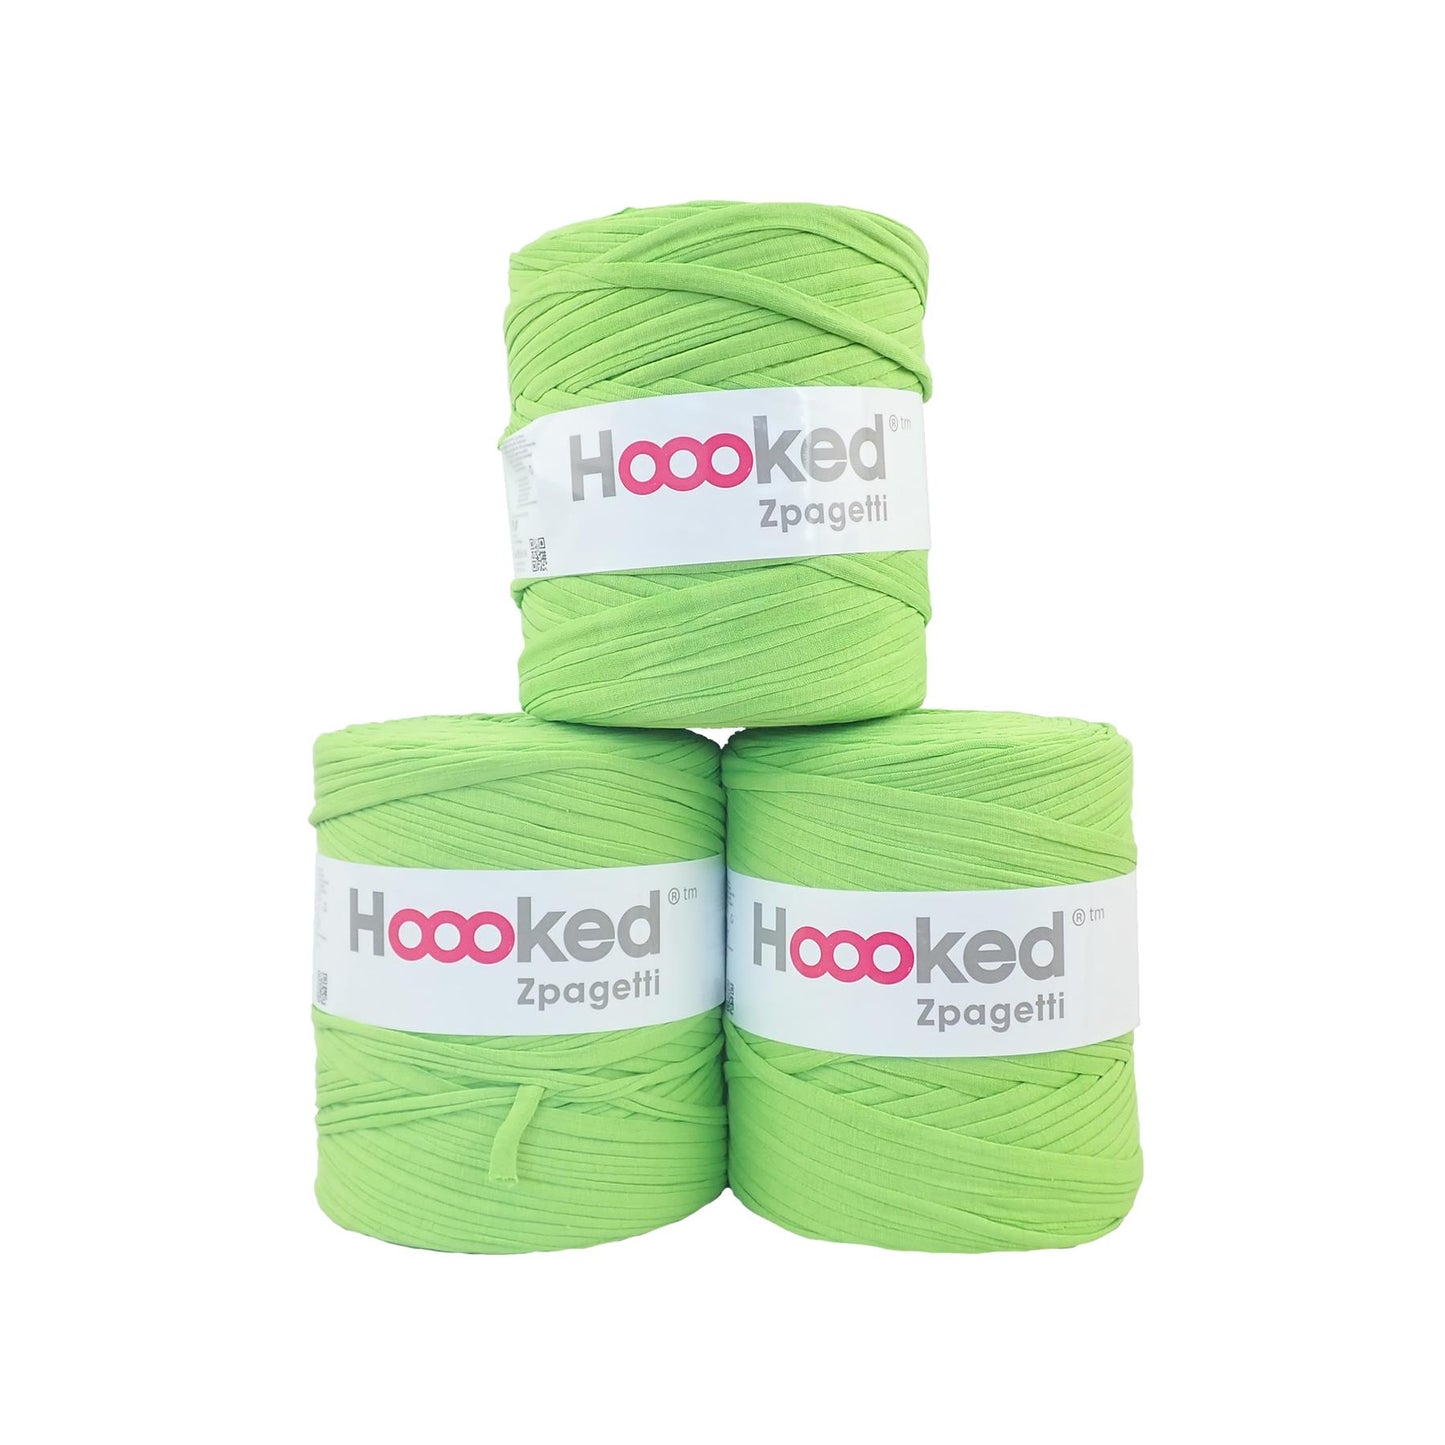 Hoooked Zpagetti Grass Green Cotton T-Shirt Yarn - 120M 700g (Pack of 3)